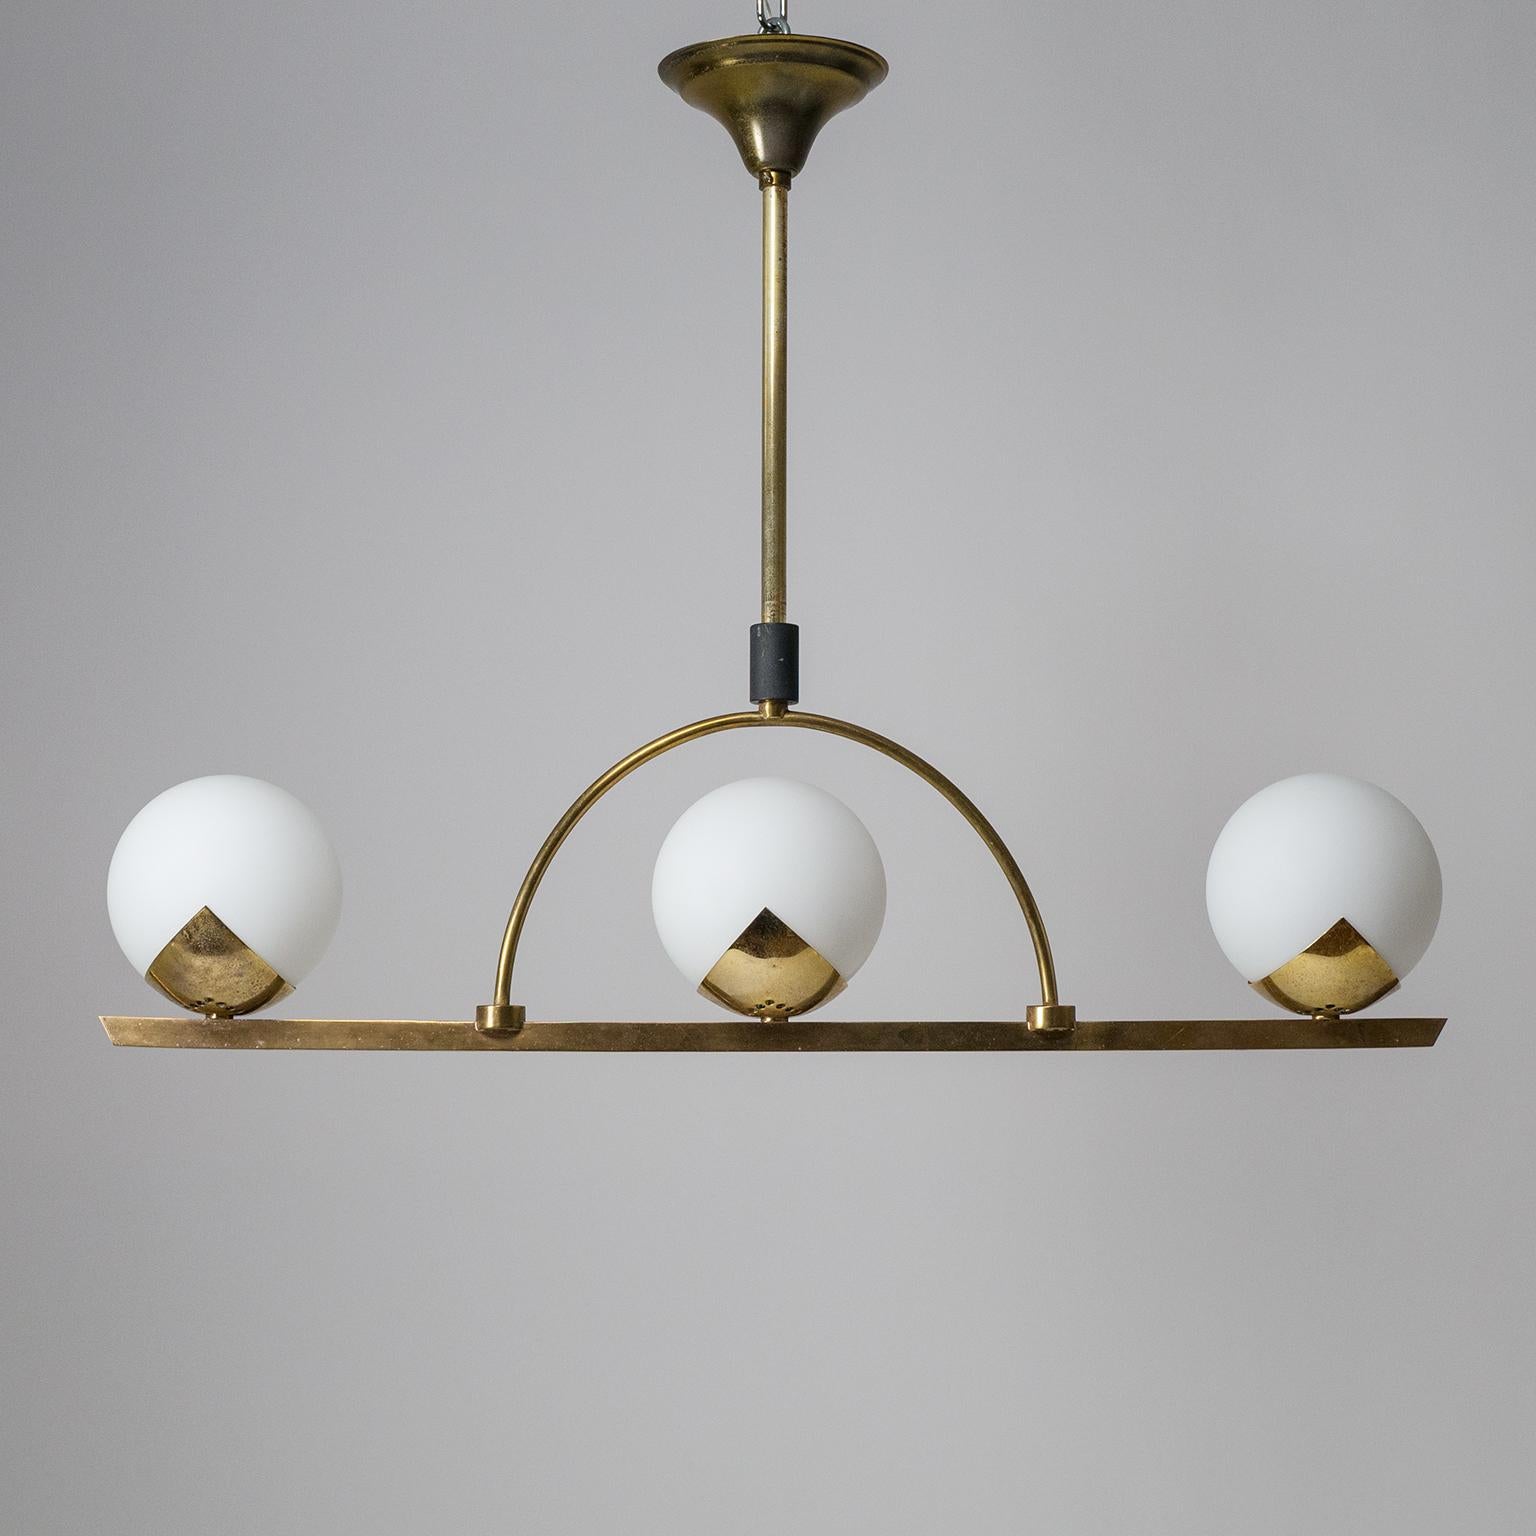 Elegant French Modern three-globe chandelier from the 1950s. Lovely minimalist brass structure with unusual 'triangular' and pierced brass supports for the satin glass diffusers. Good original condition with a nice patina on the brass. Three old